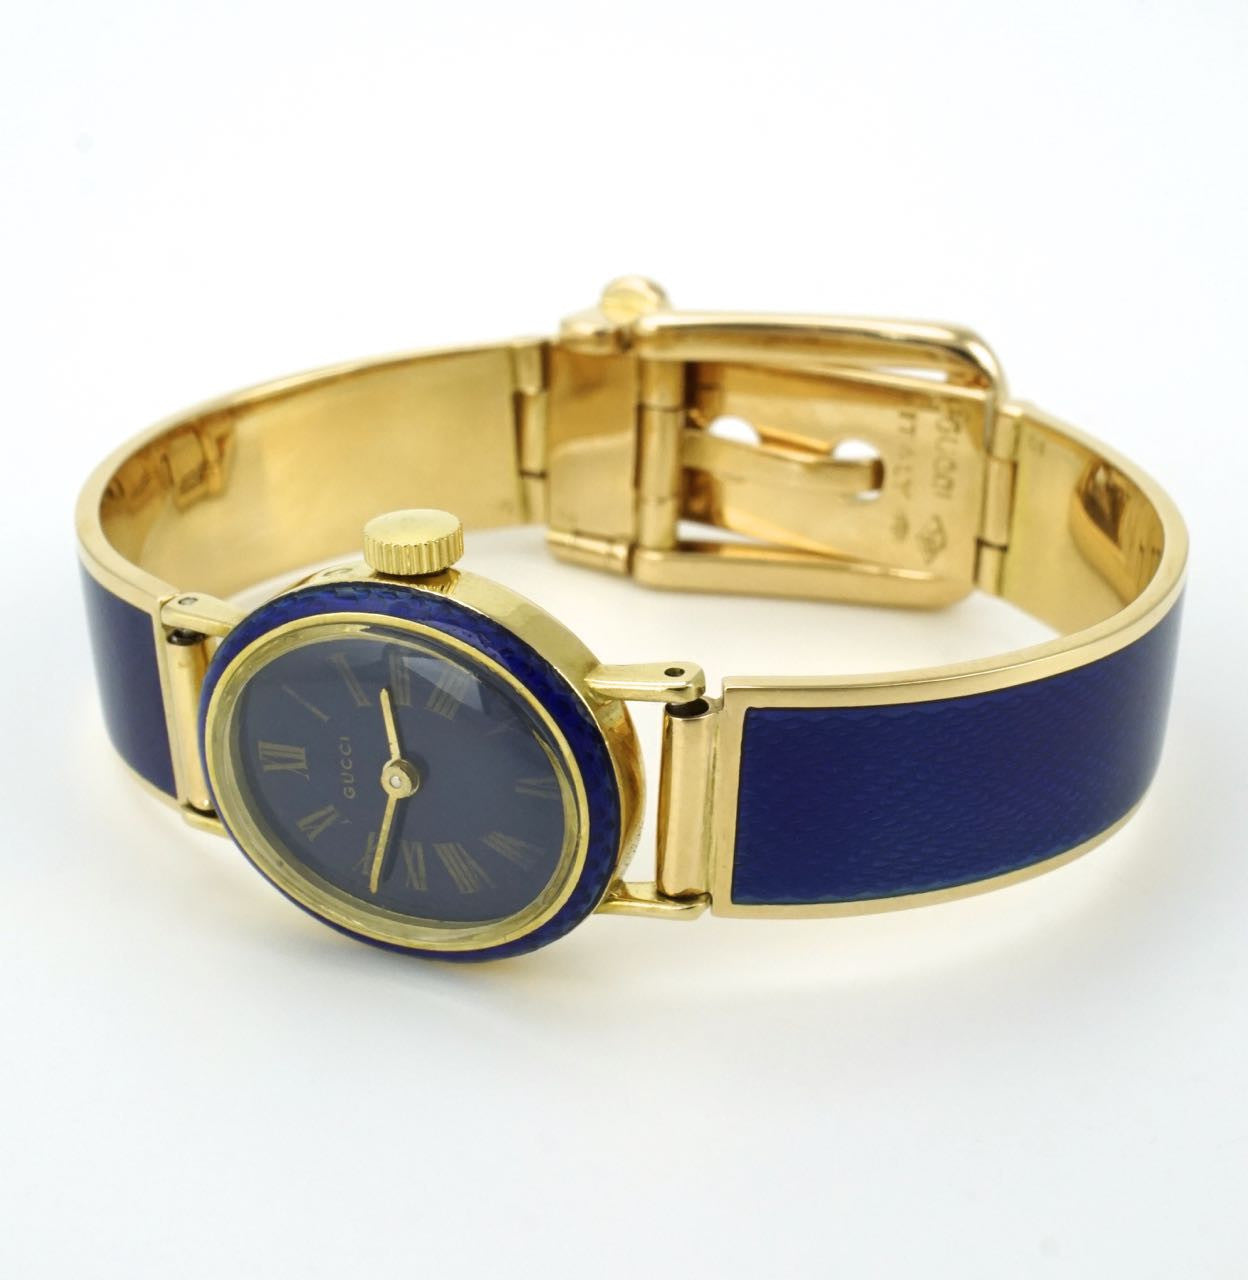 AUTHENTIC GUCCI LADIES Watch 18K Gold Plated Bracelet Swiss Made 5400 in  Box £295.00 - PicClick UK